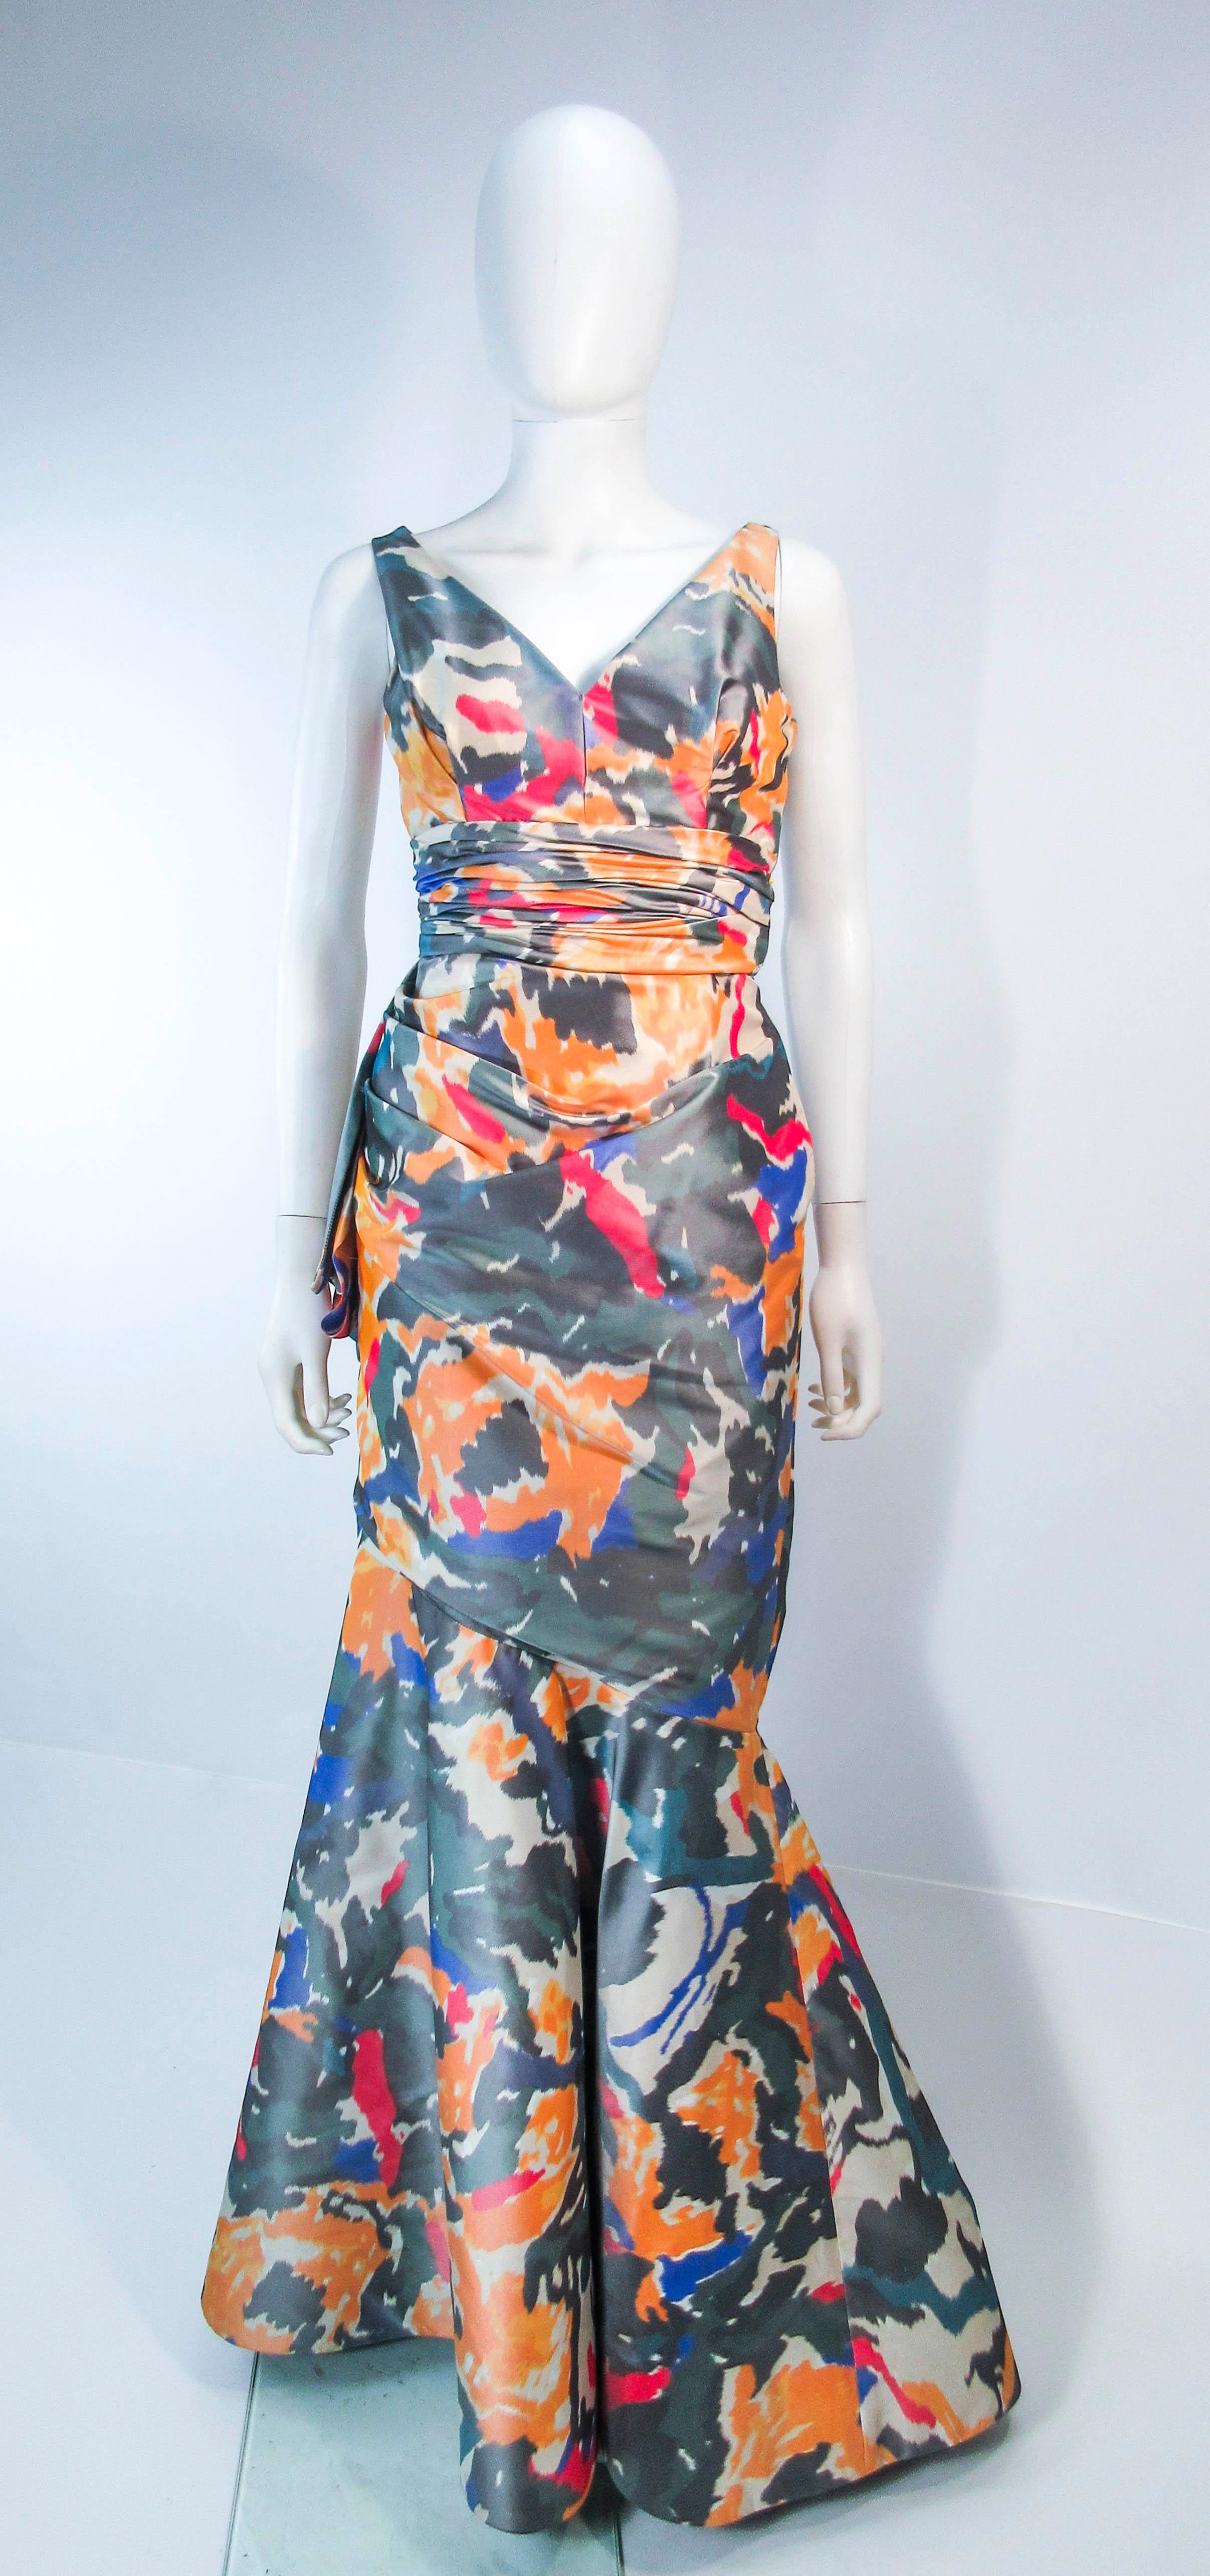 This Oscar De La Renta gown is composed of silk in an Ikat print with hues of grey, yellow, red, & blue. Features a v-neck design with a flared knee to hem design and gathered waist. There is a side zipper closure. In excellent vintage